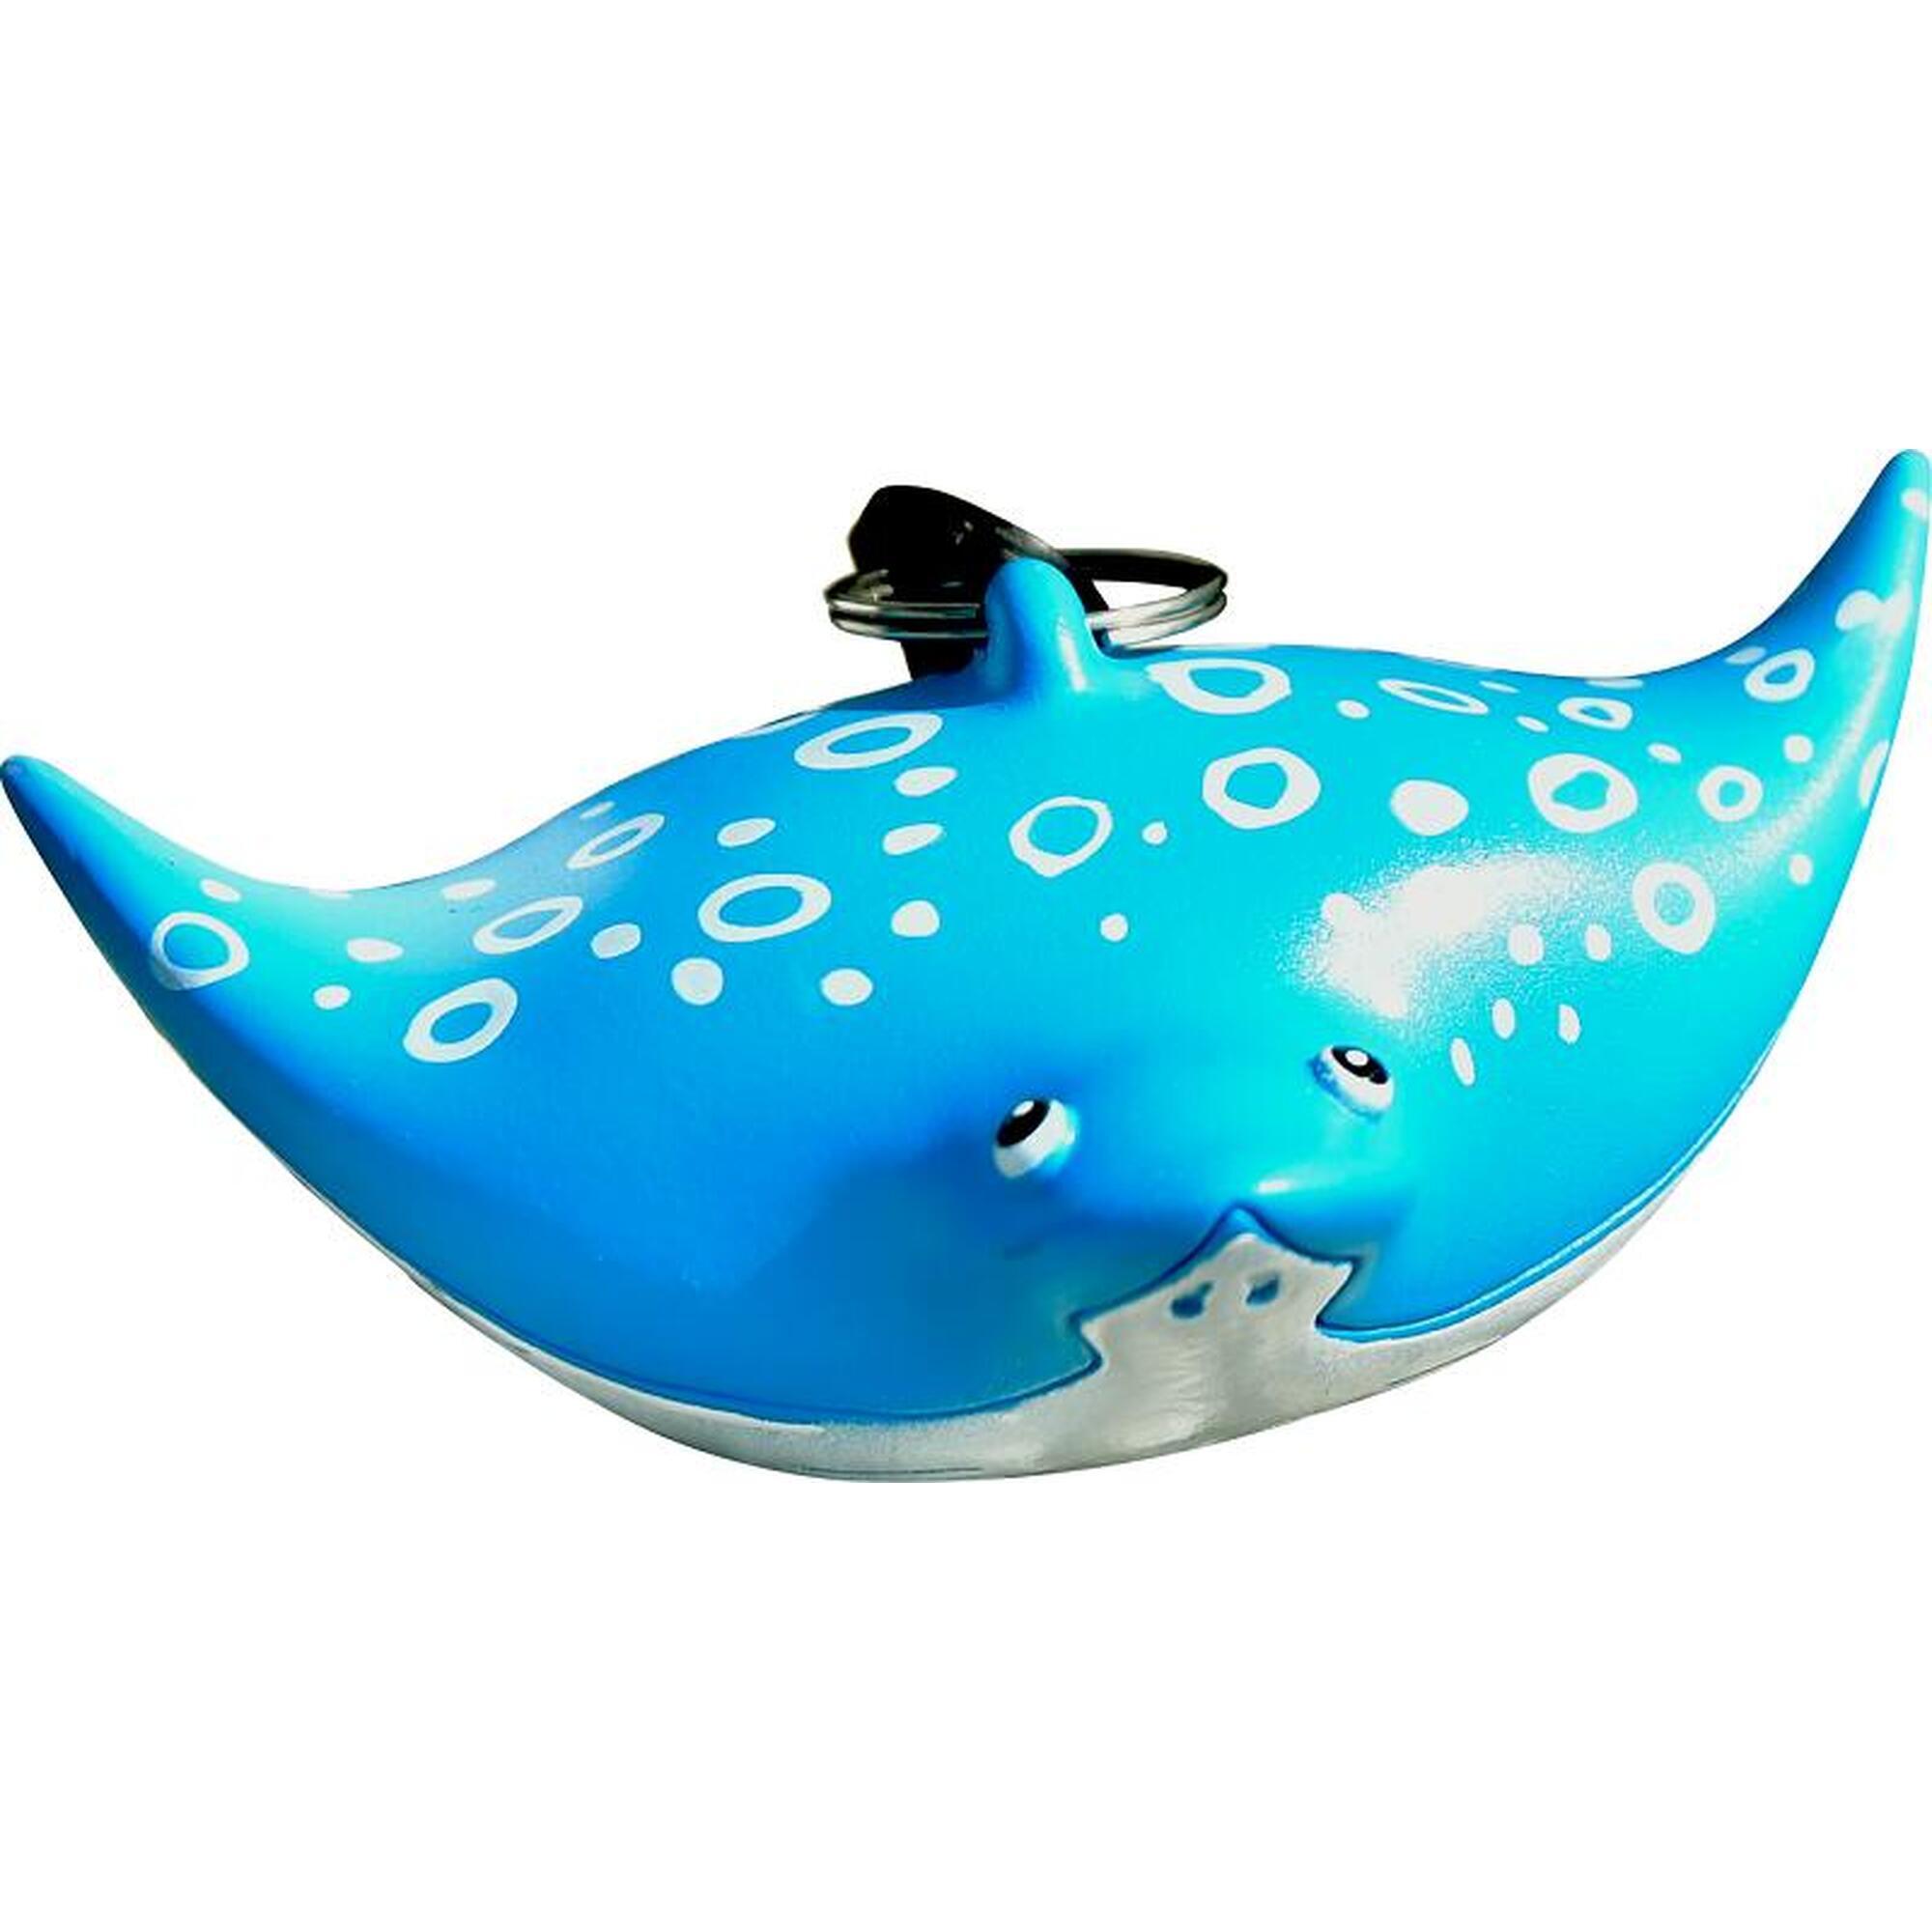 Octopus Holder - Blue (Eagle ray)